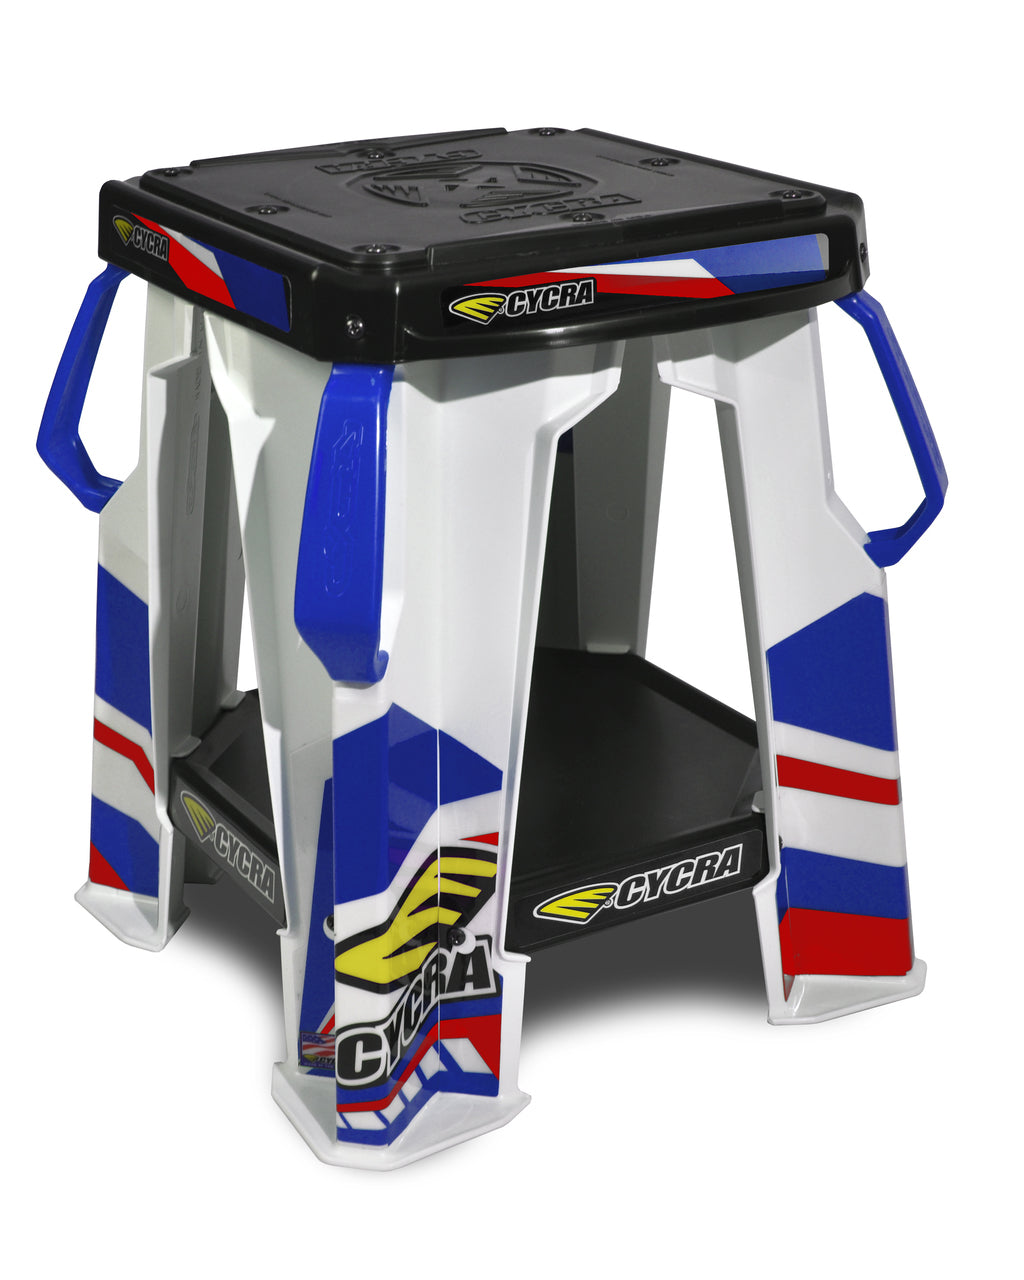 Cycra - Special Edition Dirt Bike Moto Stands